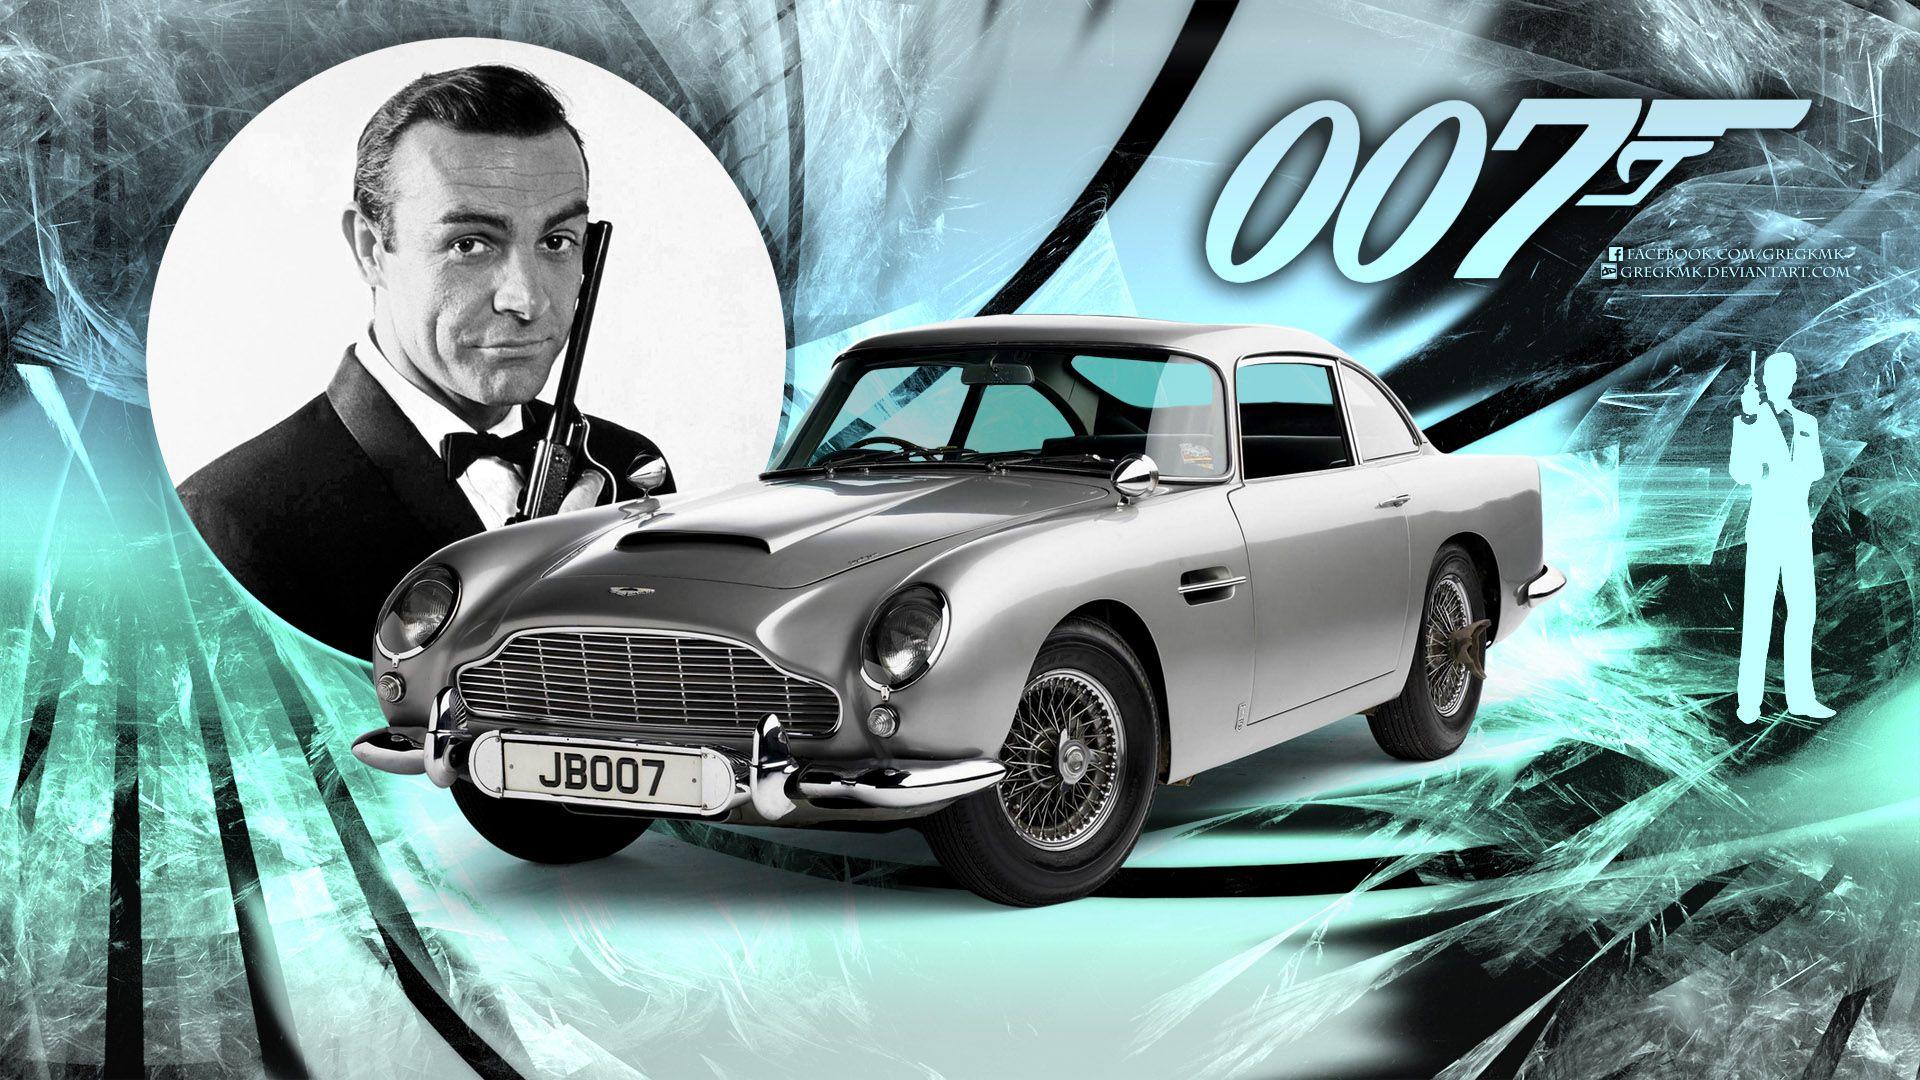 James Bond 007 Full HD Wallpaper and Background Imagex1080